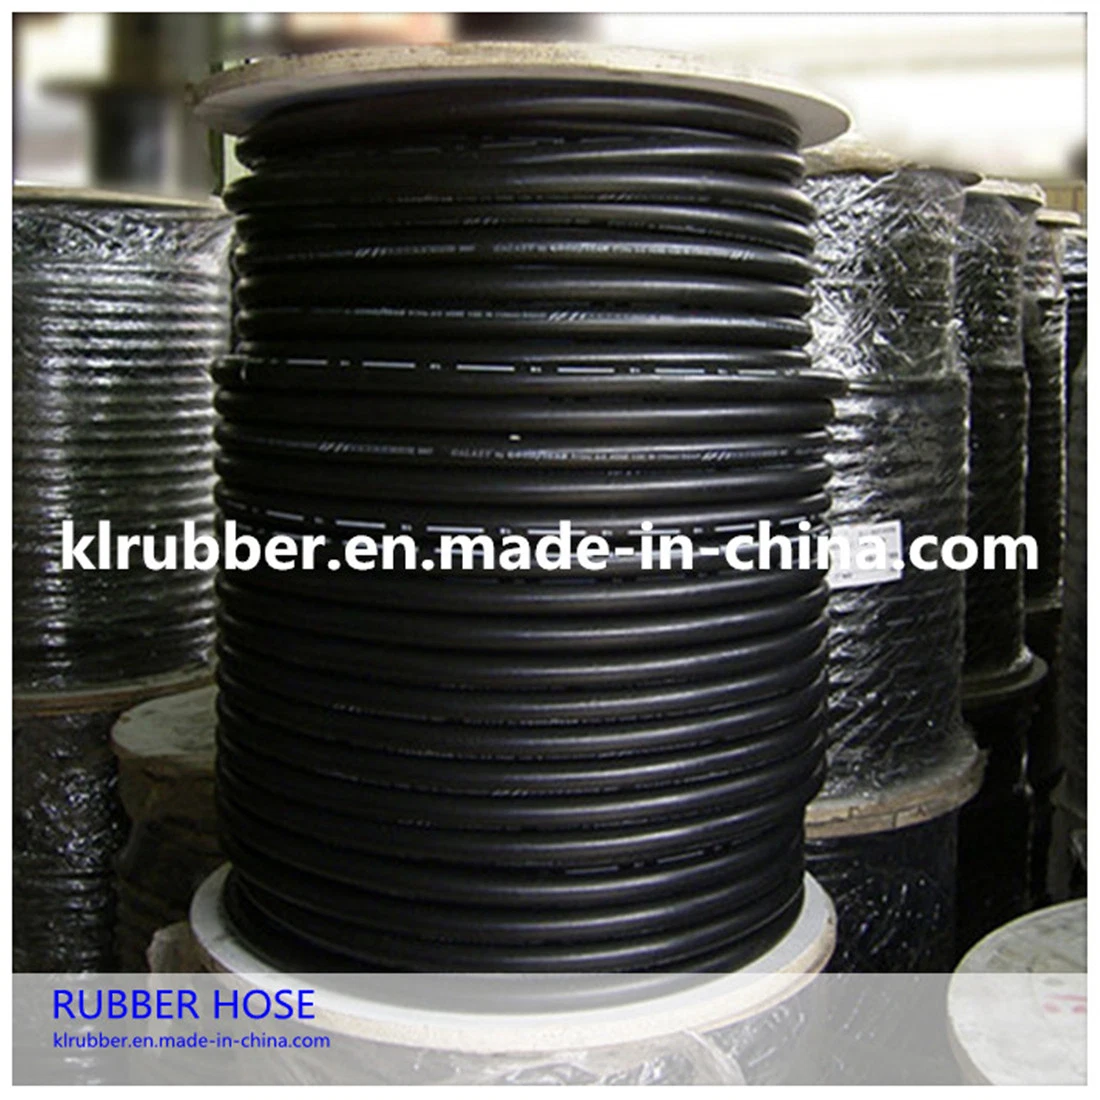 SAE J1402 High Pressure Rubber Air Brake Hose with Hydraulic Fittings